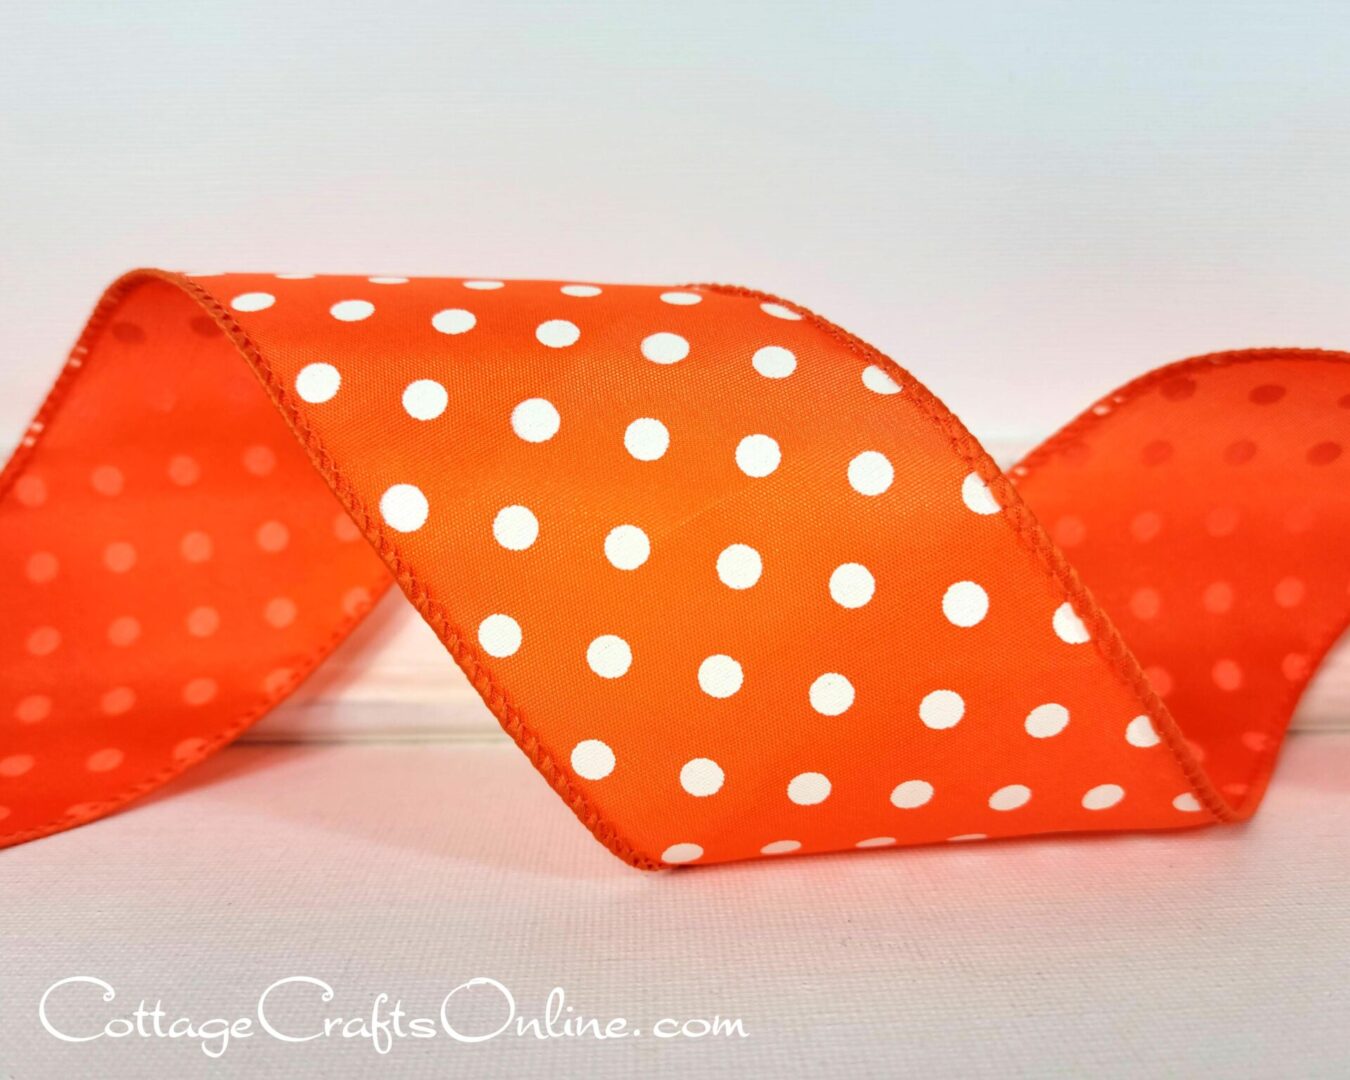 Small white dots on bright orange 2.5" wide wired ribbon from the Etsy shop of Cottage Crafts Online.